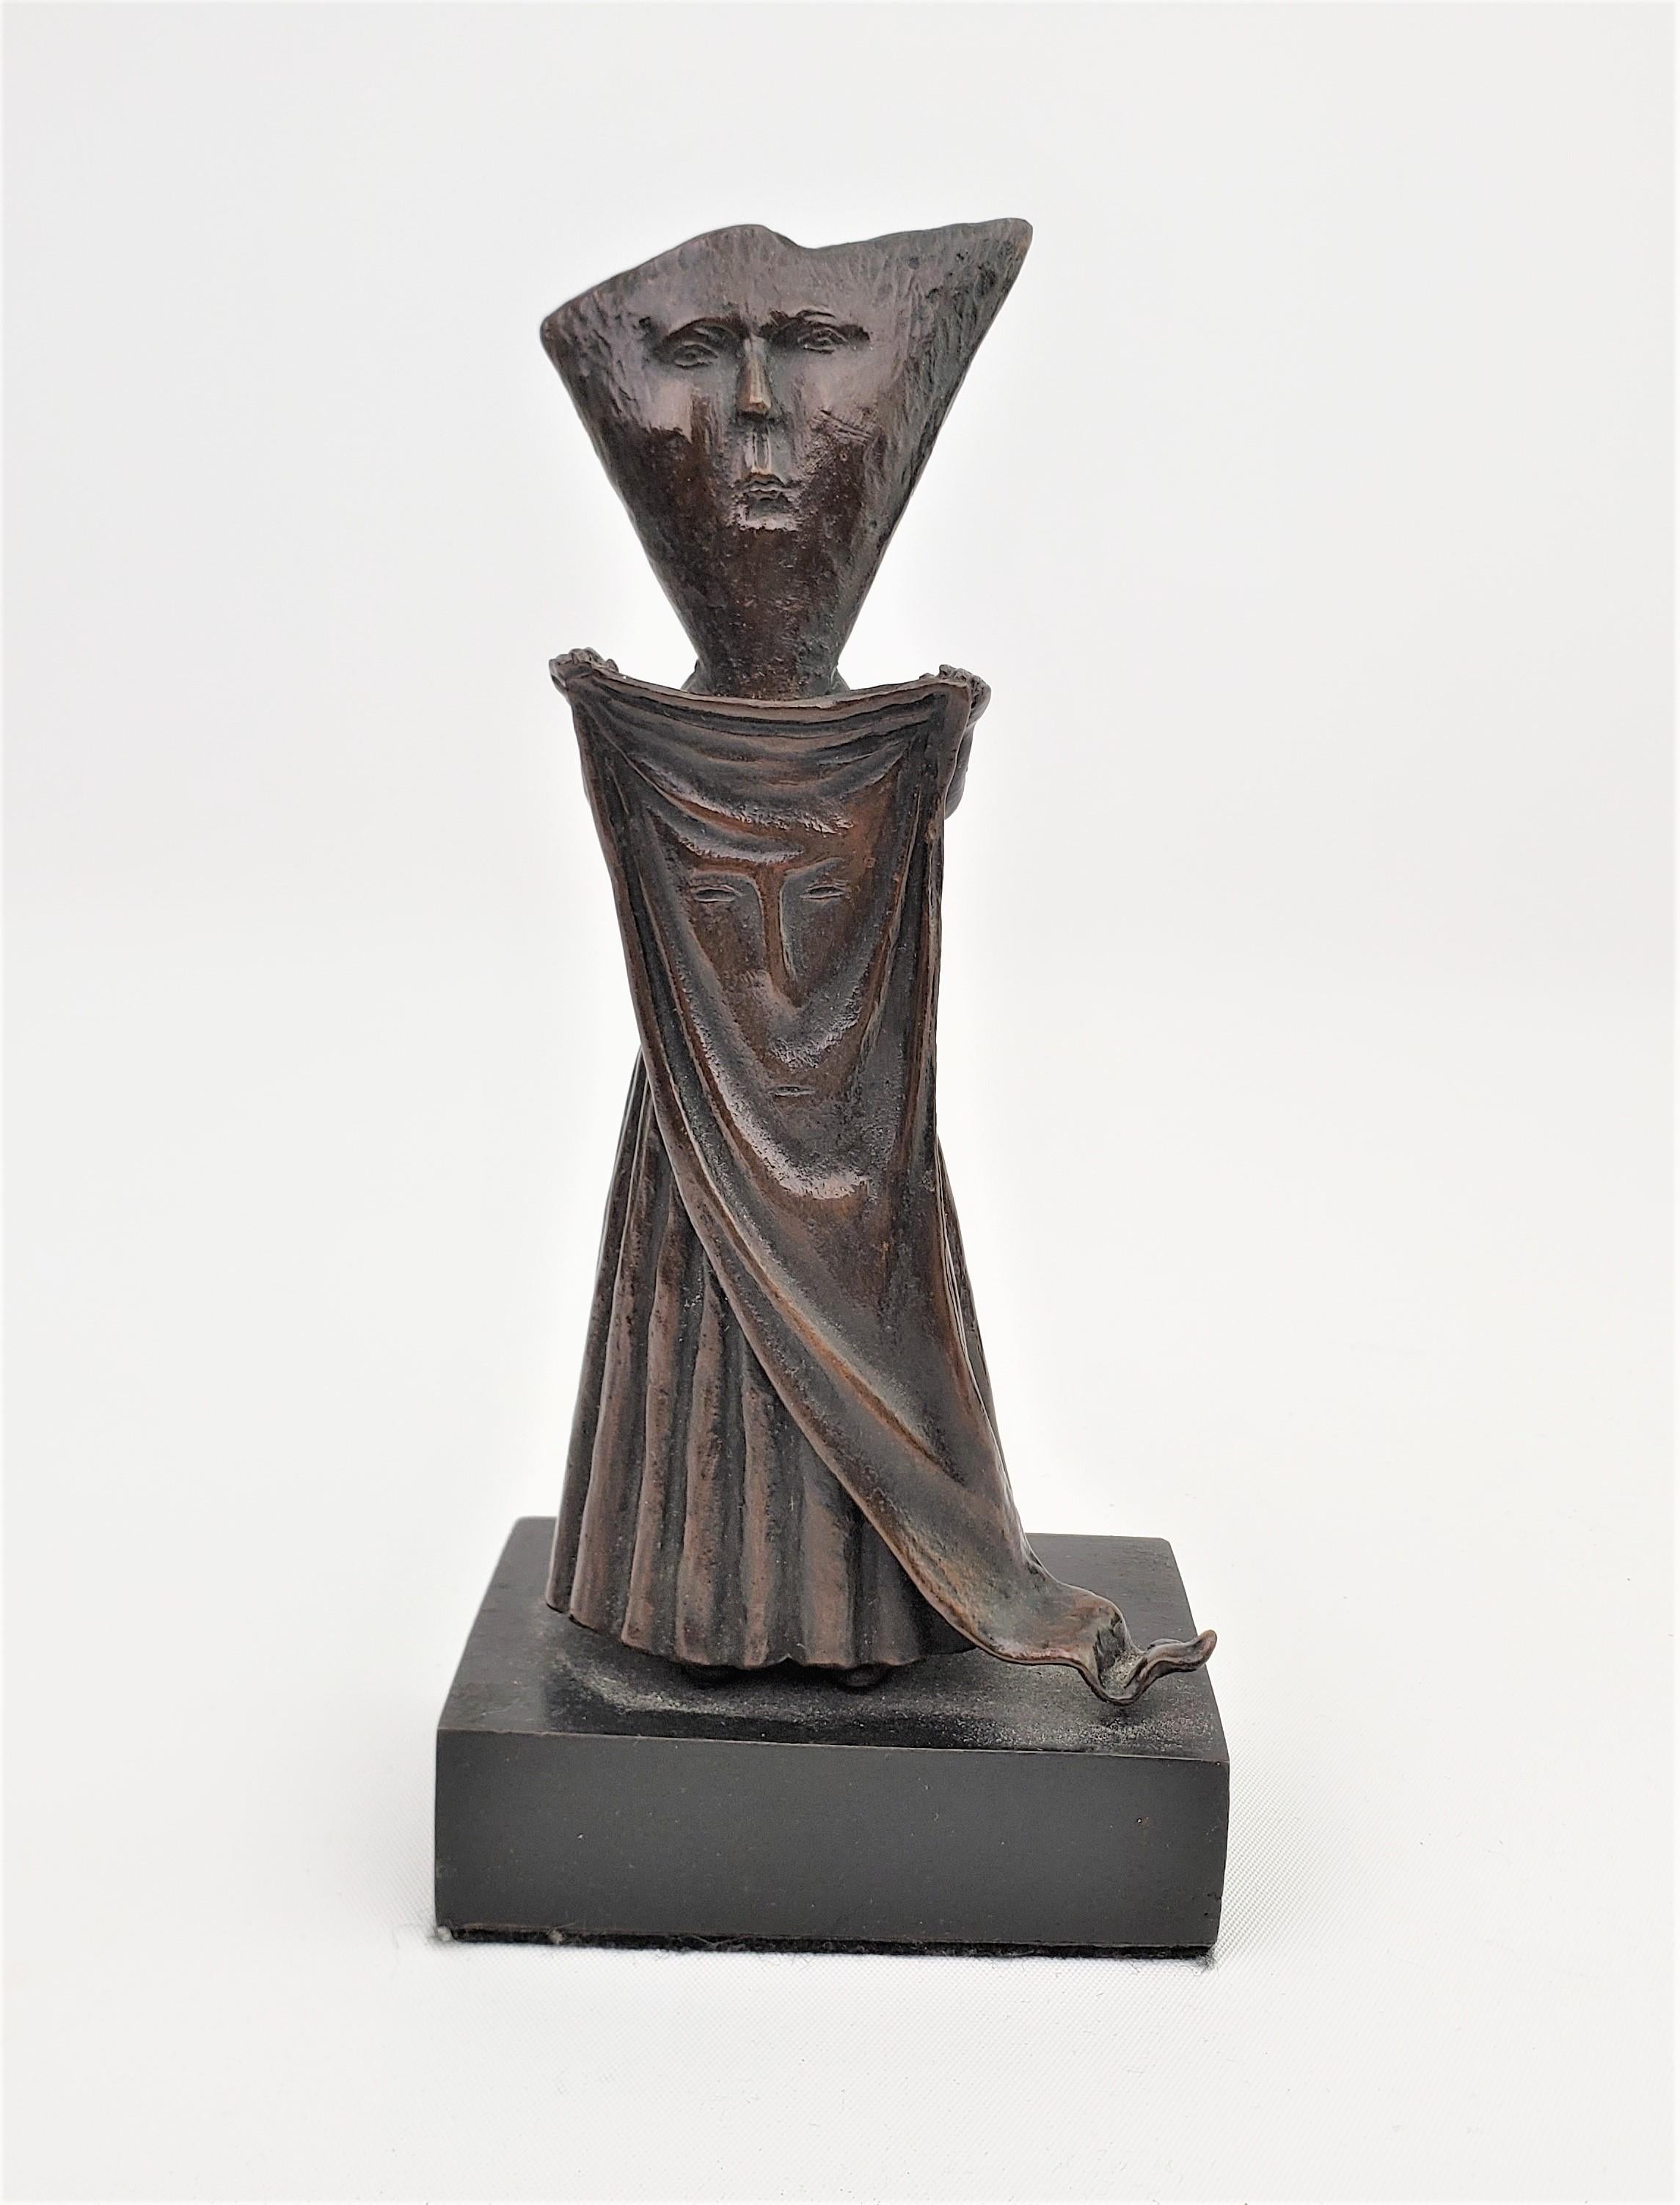 This signed Sergio Bustamante stylized figurative sculpture was made in Mexico in approximately 1970 in a Mid Century Modern style. This patinated bronze sculpture depicts and stylized or surrealistic robed standing person in his signature style.